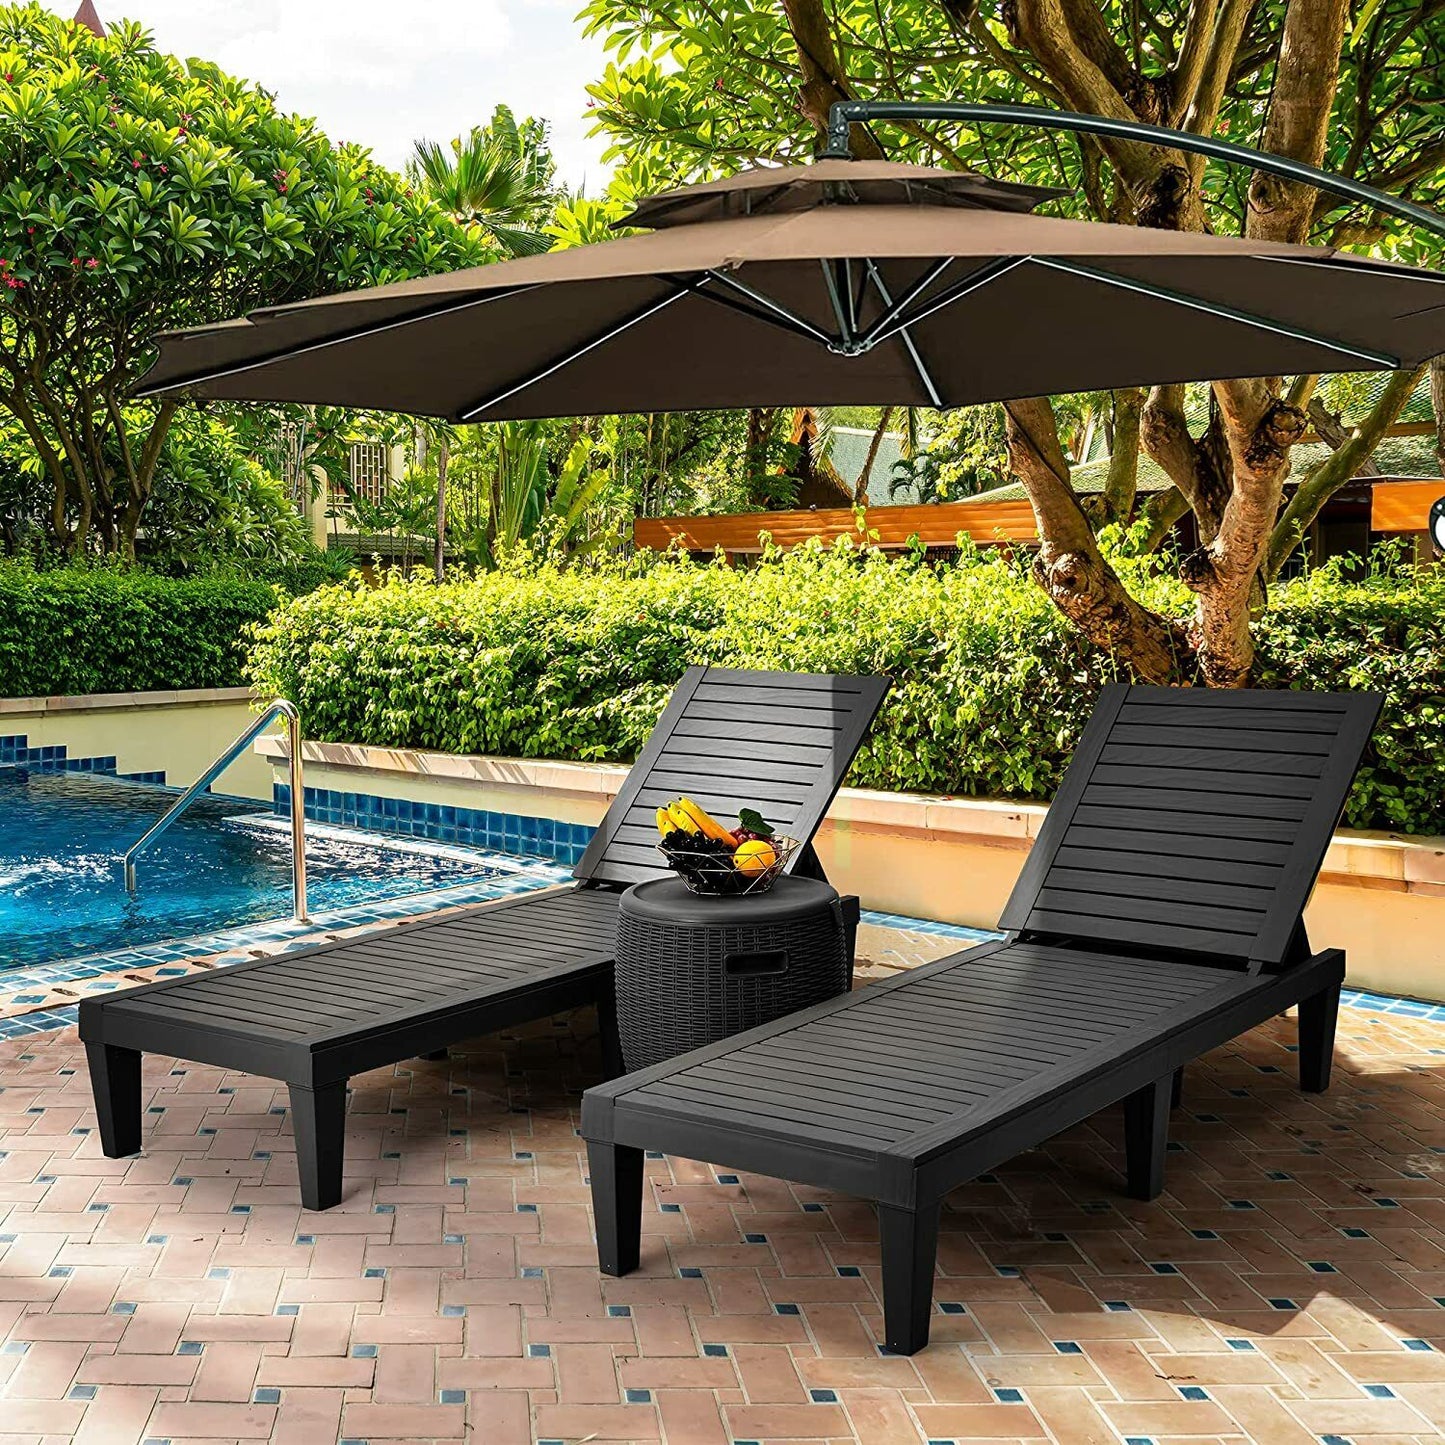 2 Piece Patio Reclining Chairs